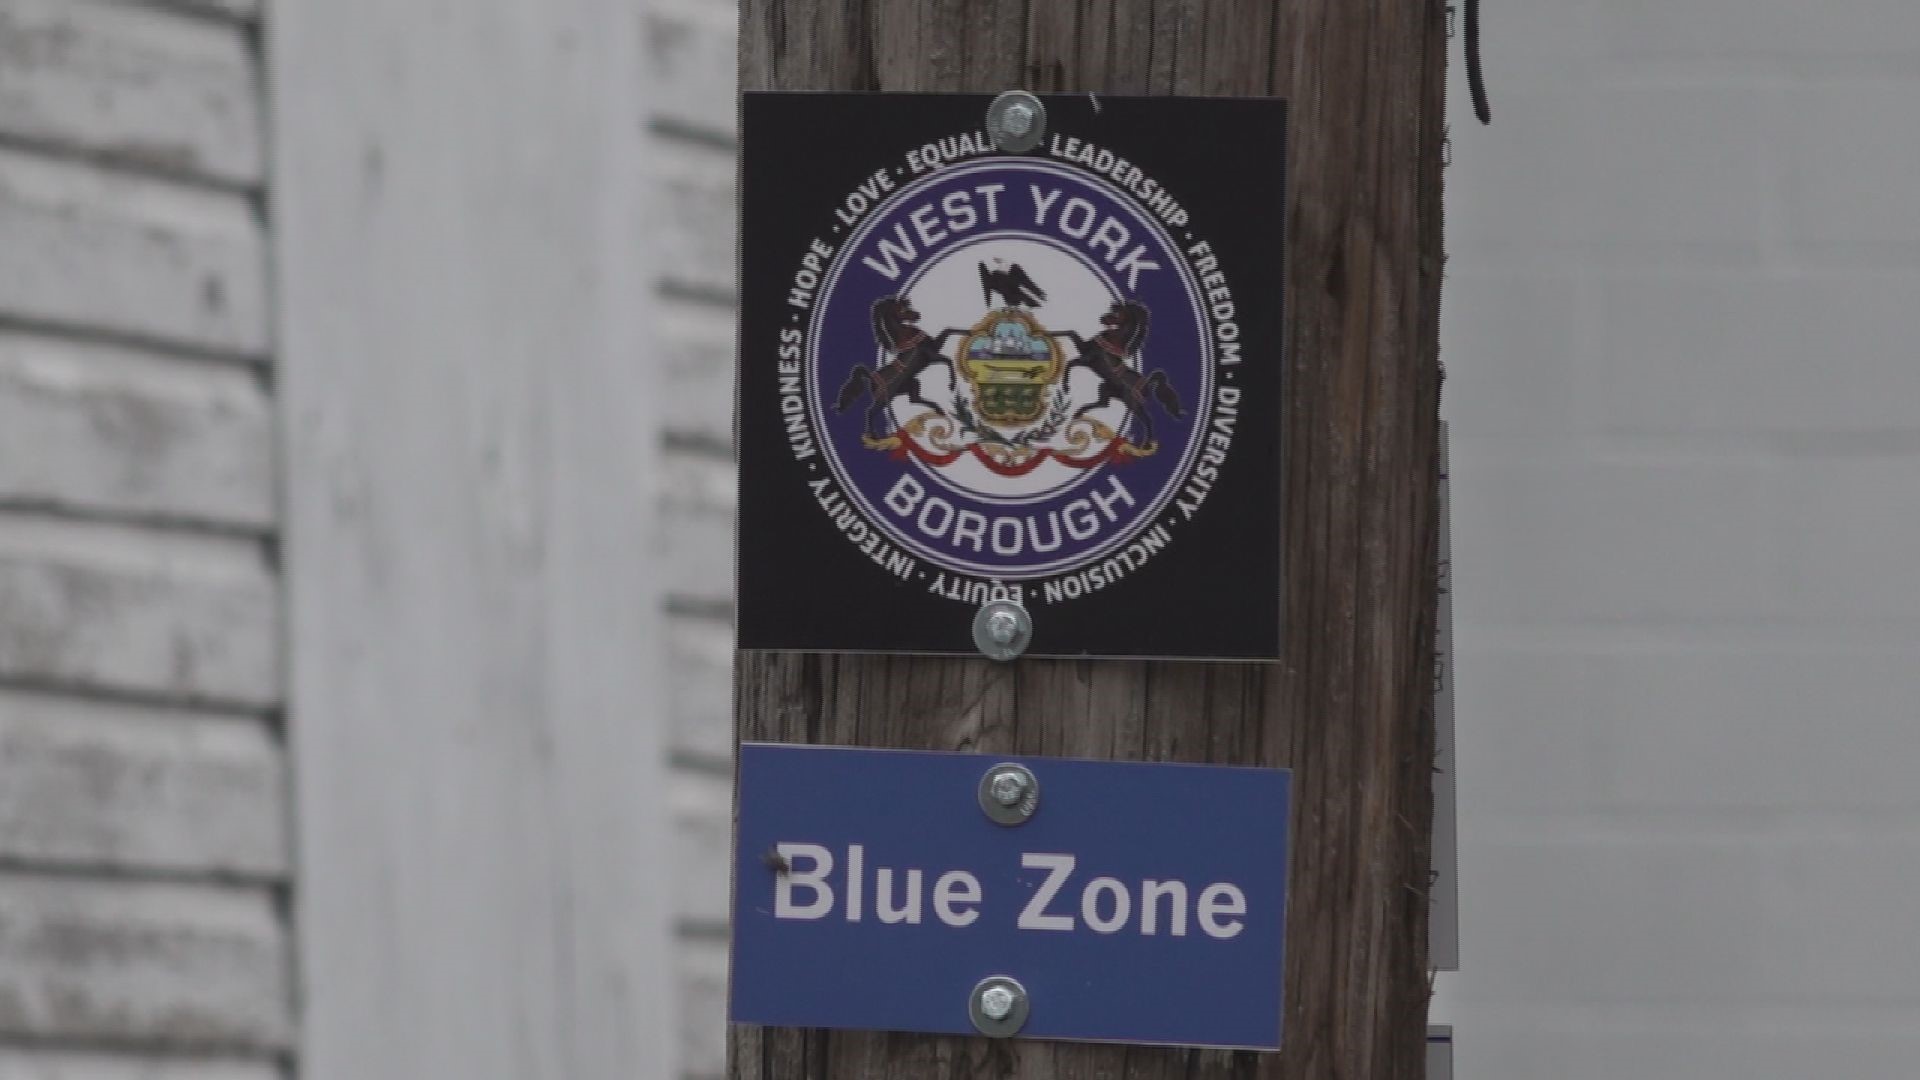 So far, one "Blue Zone" has been designated in the borough, but officials hope to soon expand the program.